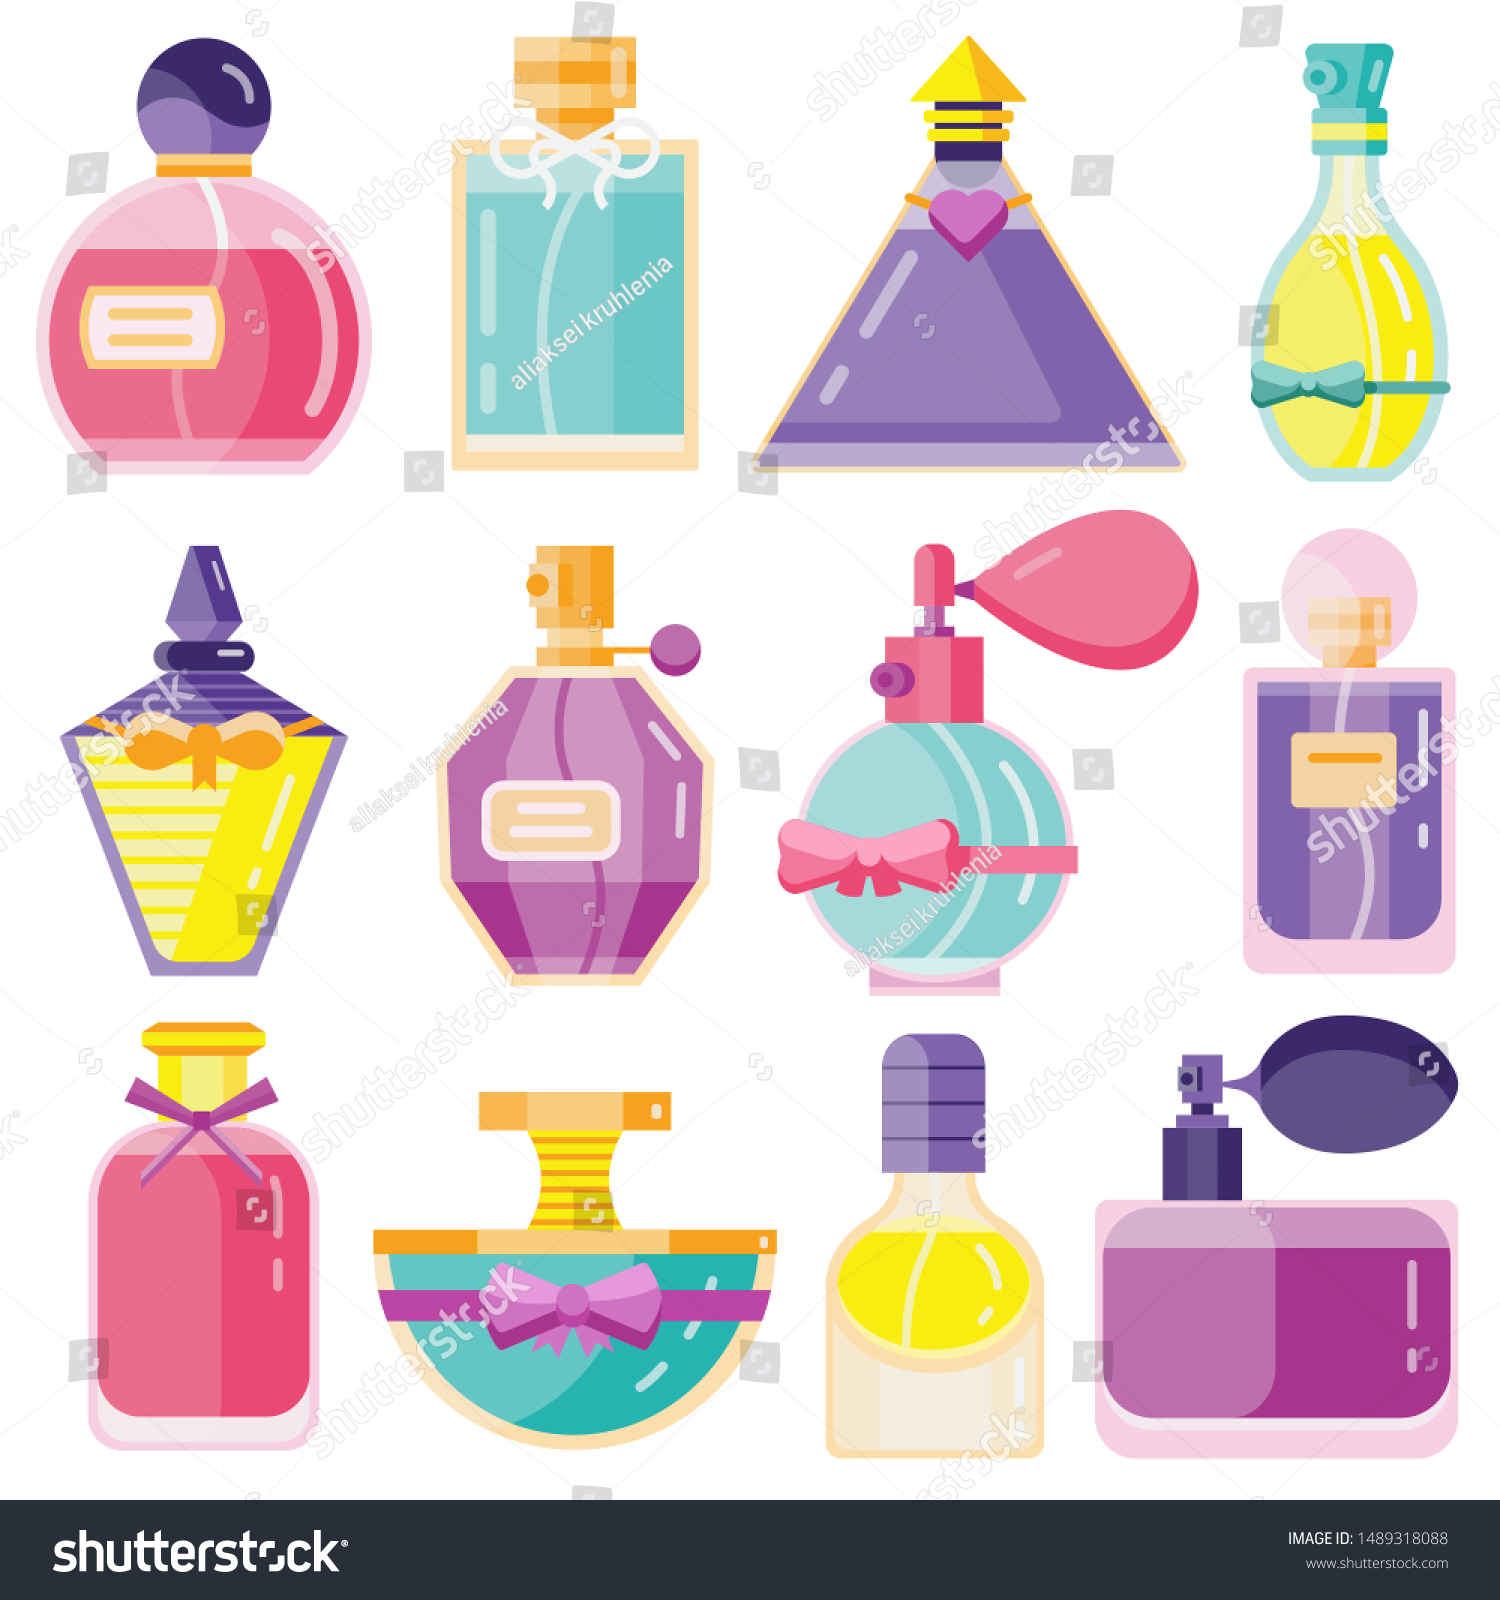 SVG of Perfume bottles set. Fragrant liquids fashion glass containers in various shapes and colors. Toilette water collection. Scented cologne icons in flat design. Scents with pumps and sprayers. svg